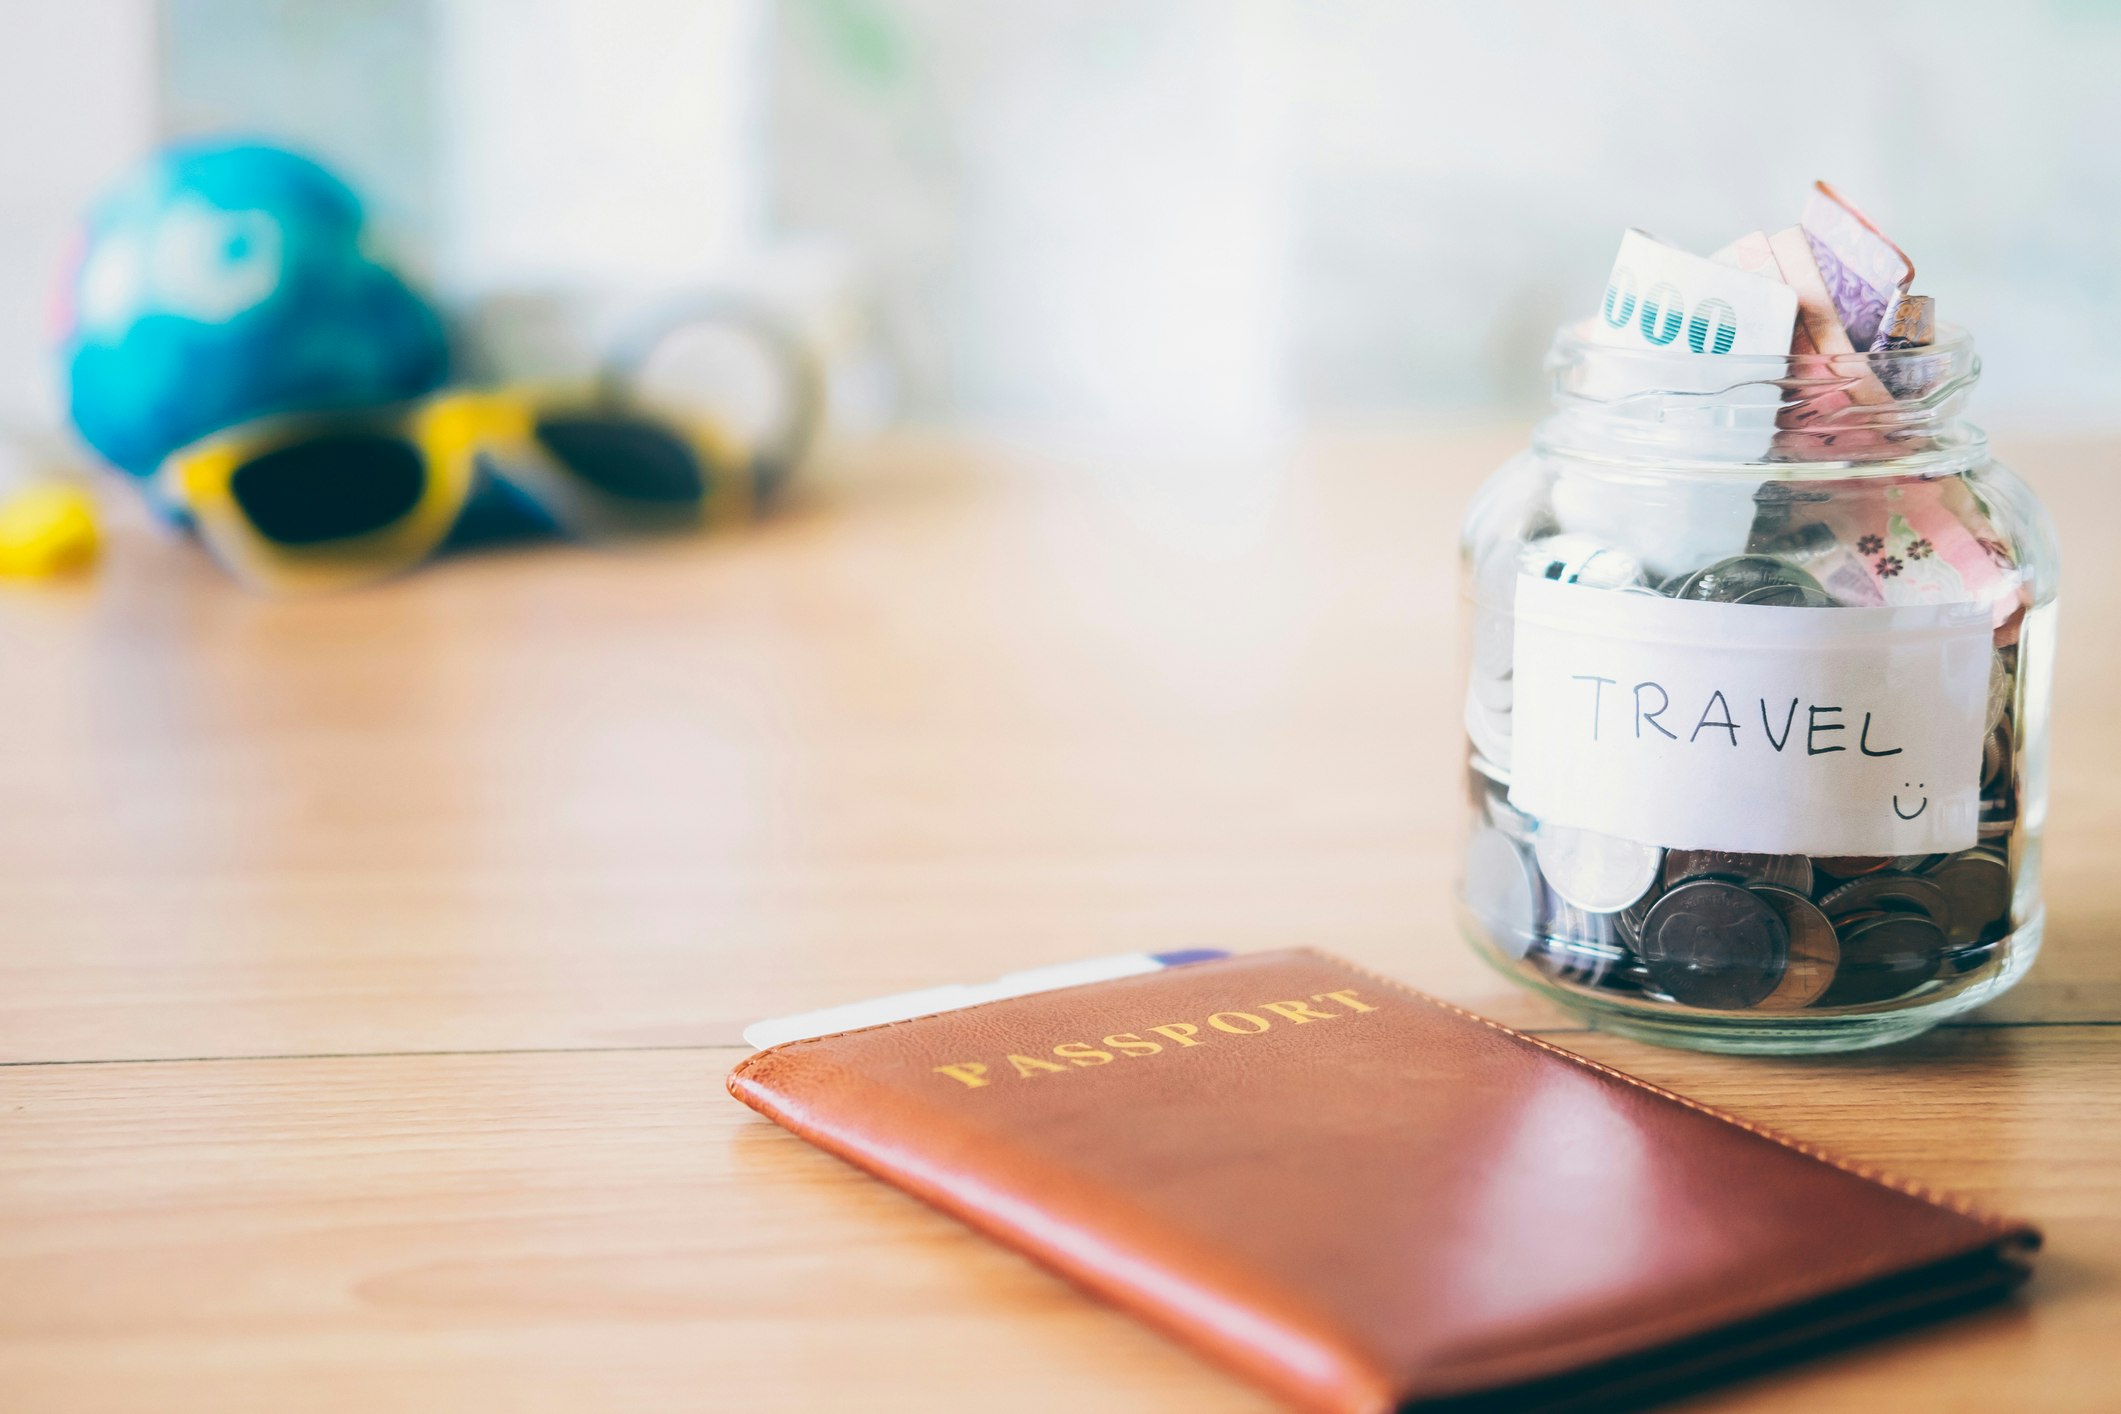 A picture of a passport and a jar of bills labeled as "travel" with a smiley face